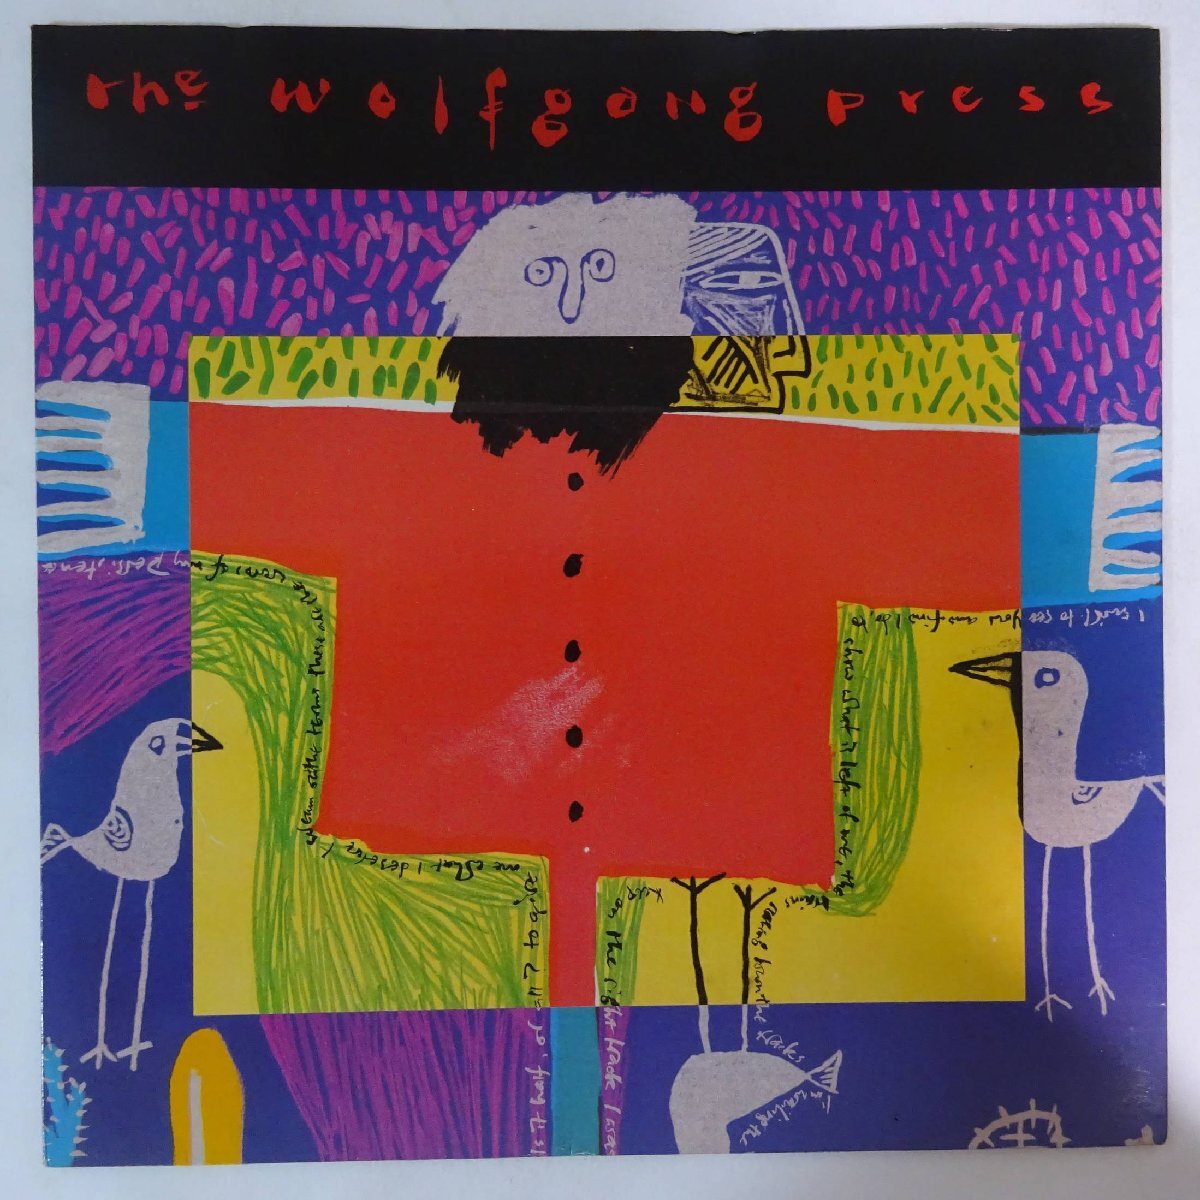 11183490;【UK盤/12inch】The Wolfgang Press / Scarecrow_画像1